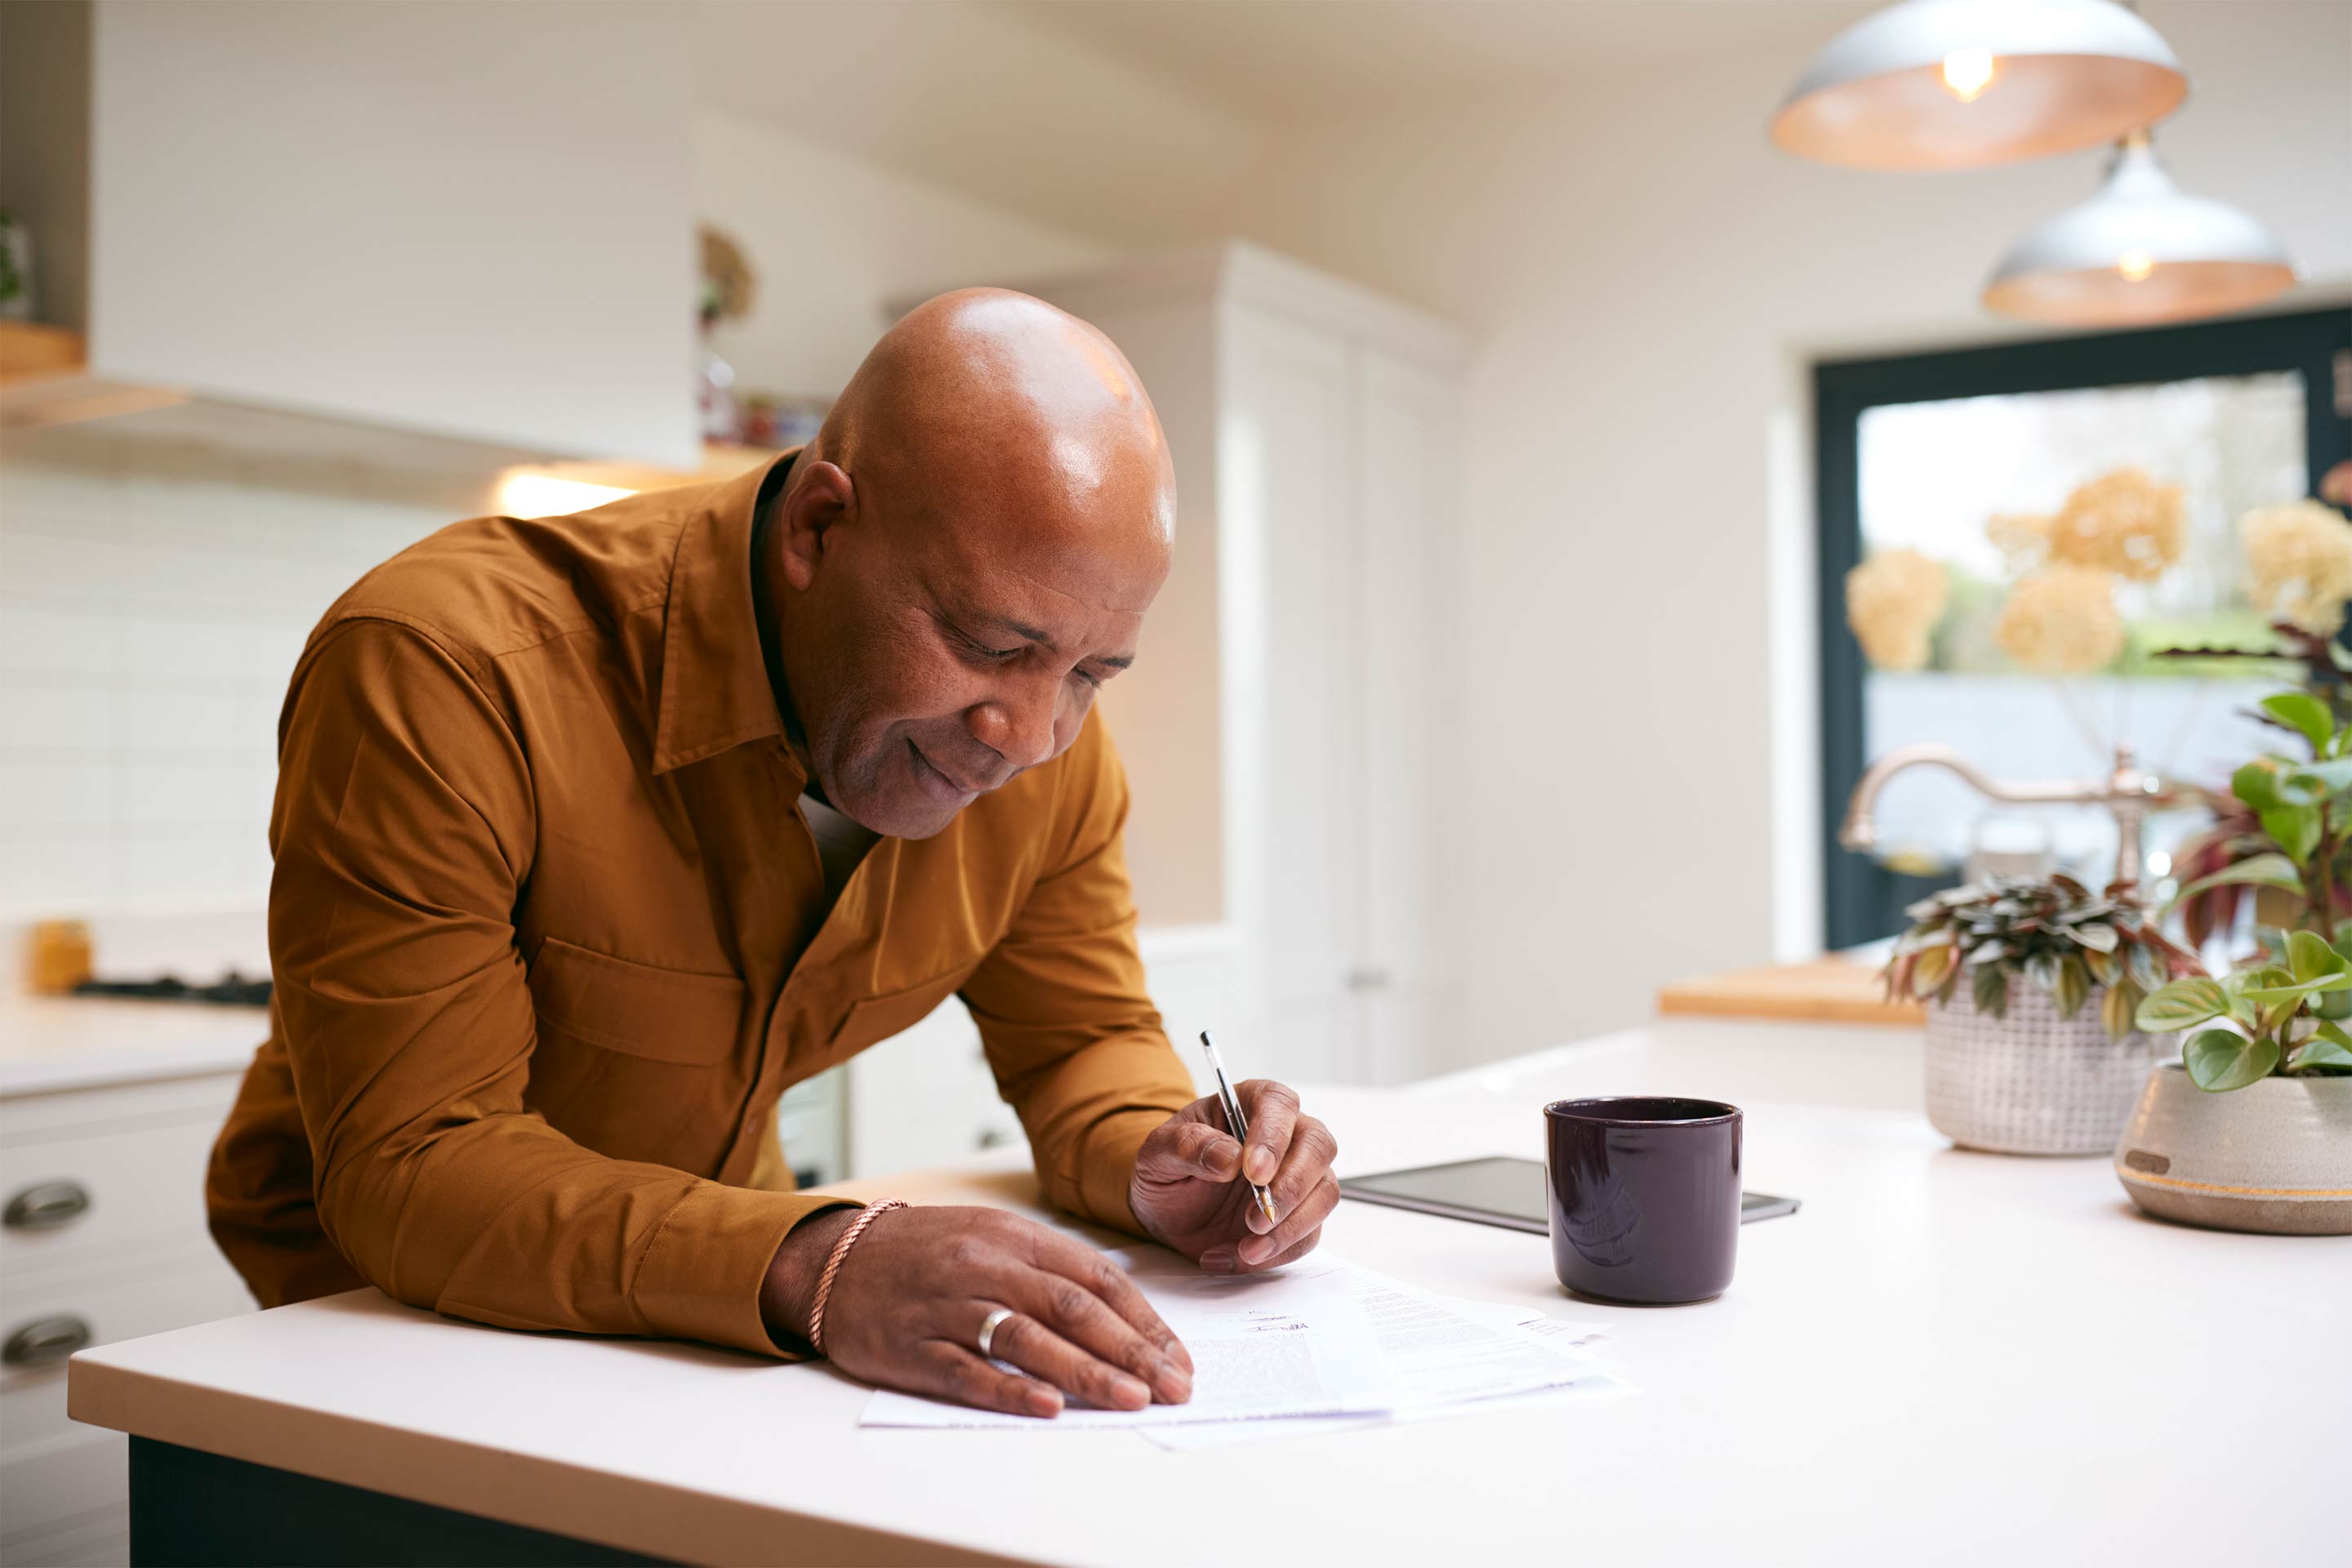 8 Things To Know Before Submitting a Life Insurance Application